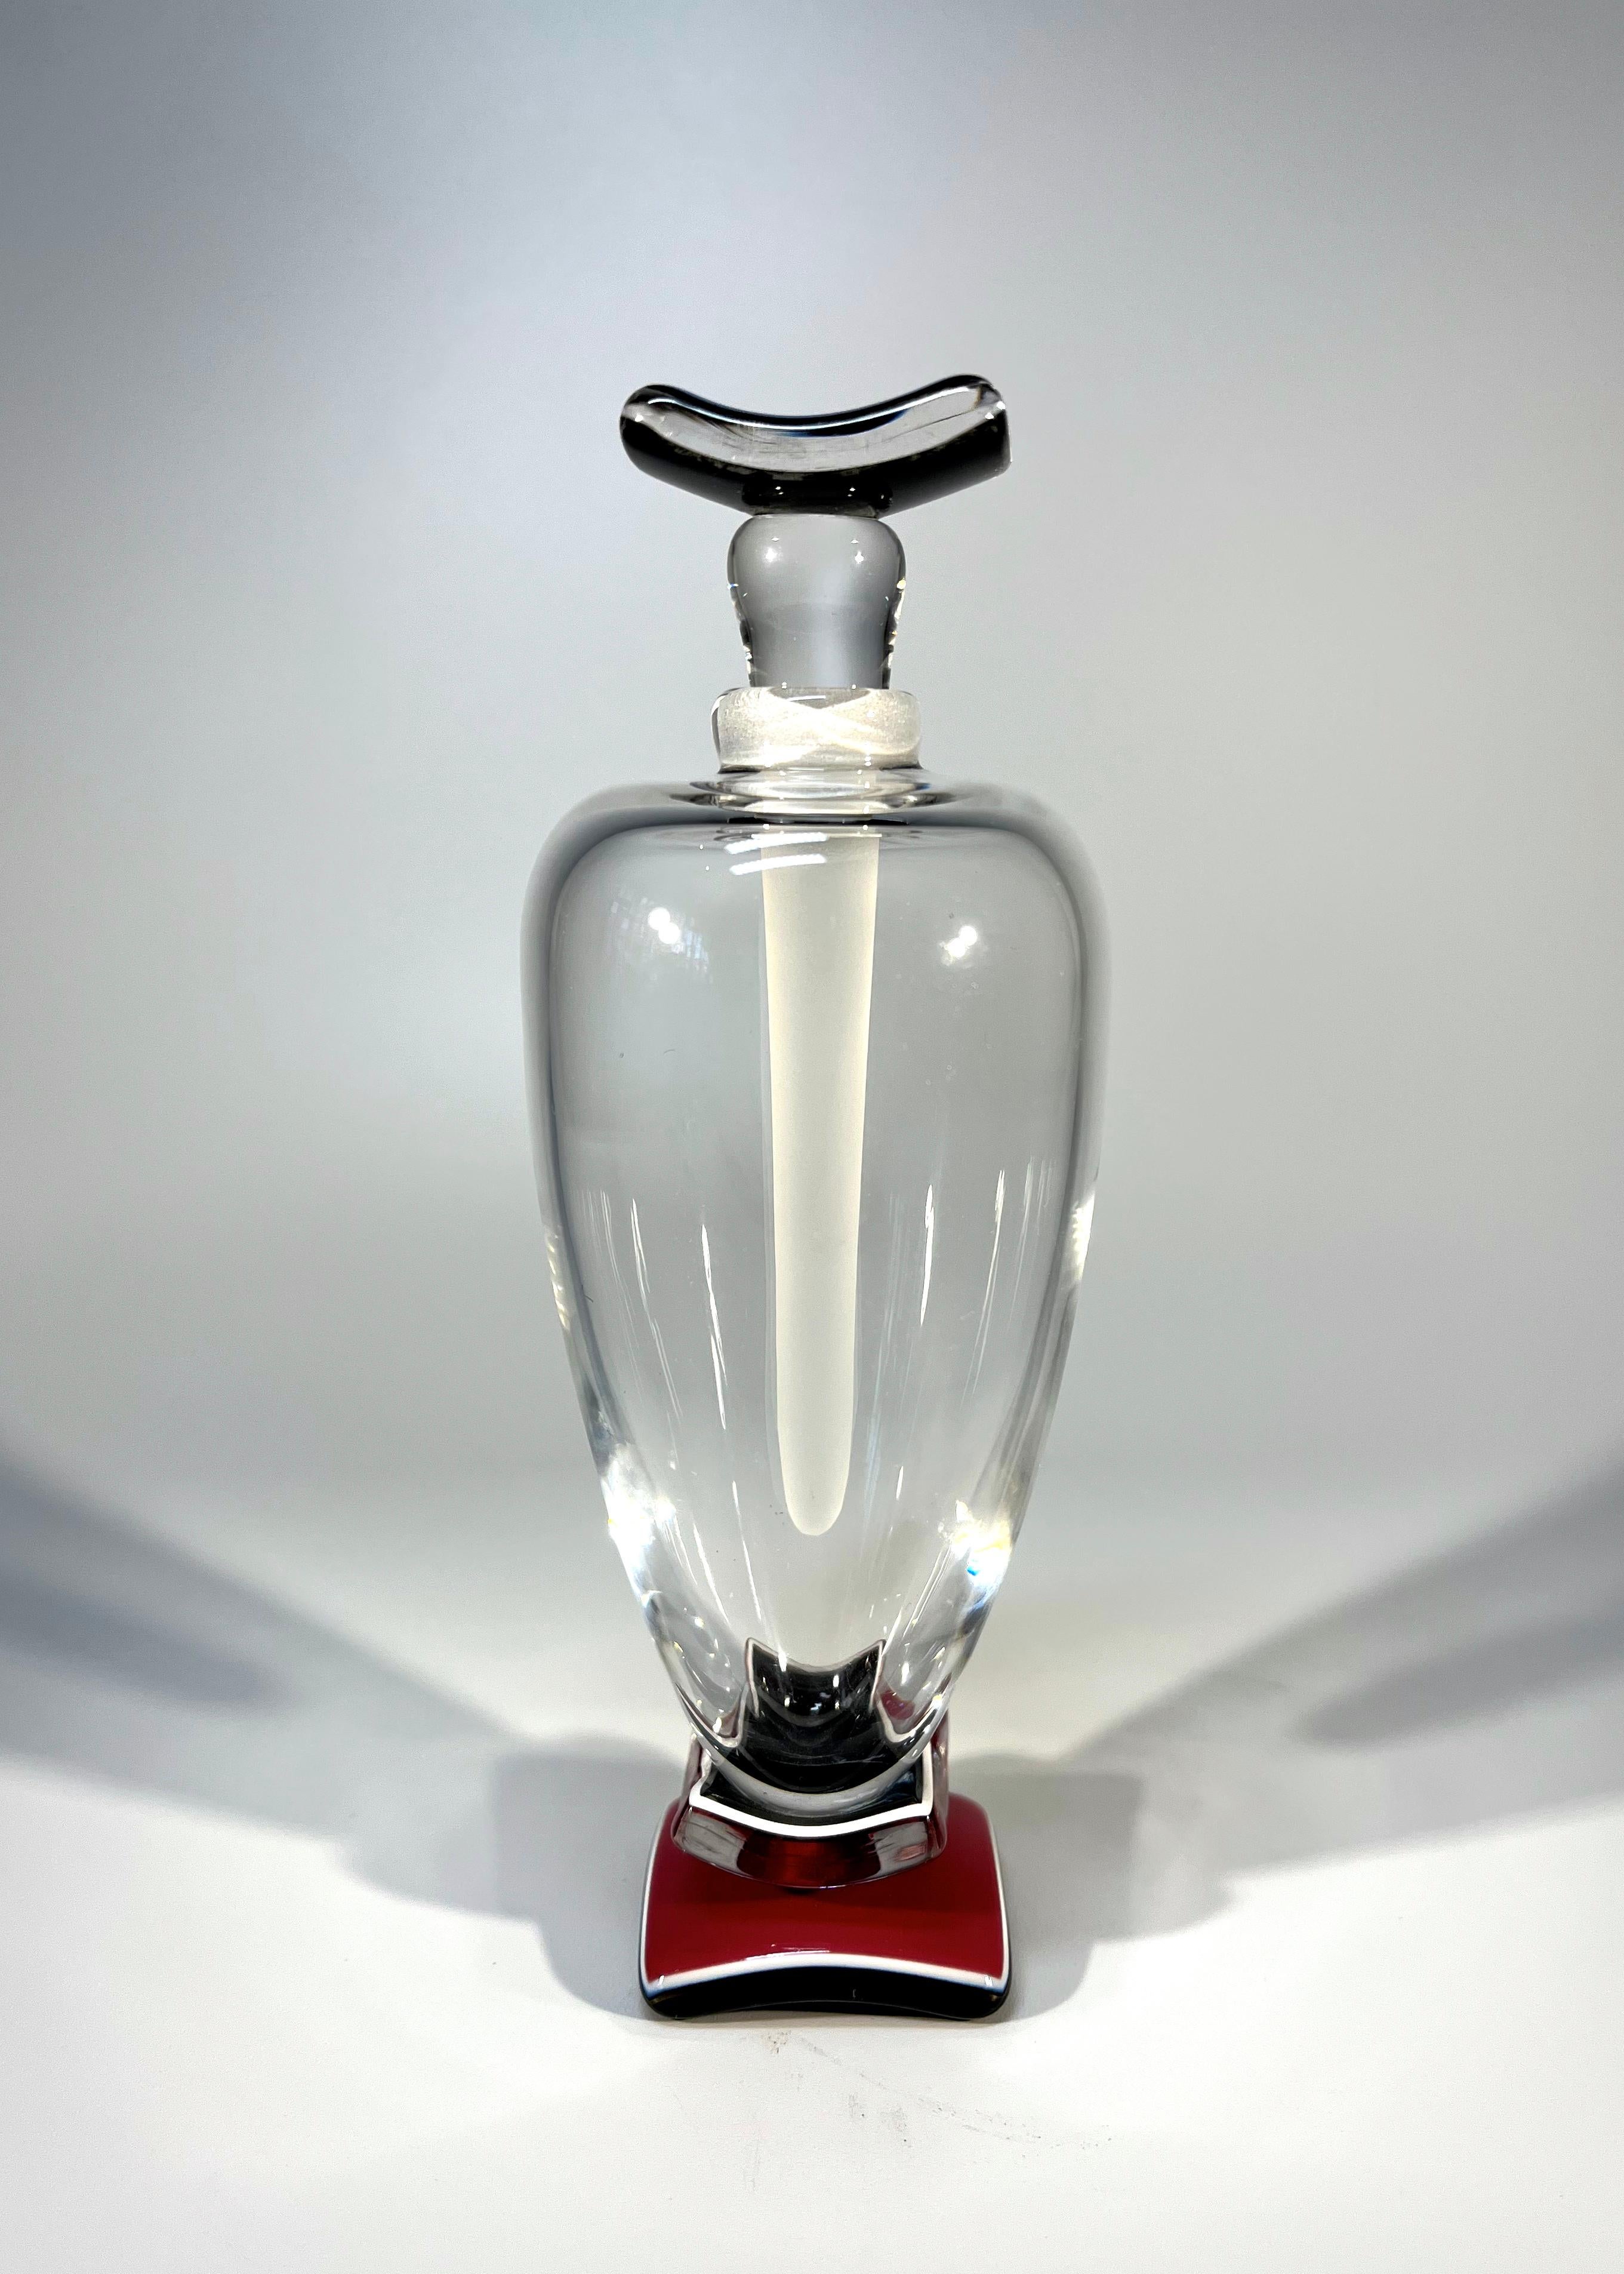 An elegantly tall perfume bottle of clear, deep rose pink and black crystal
Especial elongated frosted crystal stopper
Created by superbly talented glass artist Anthony Wassell, England
Signature etched to base
Circa 1990-2003
Height with stopper 6